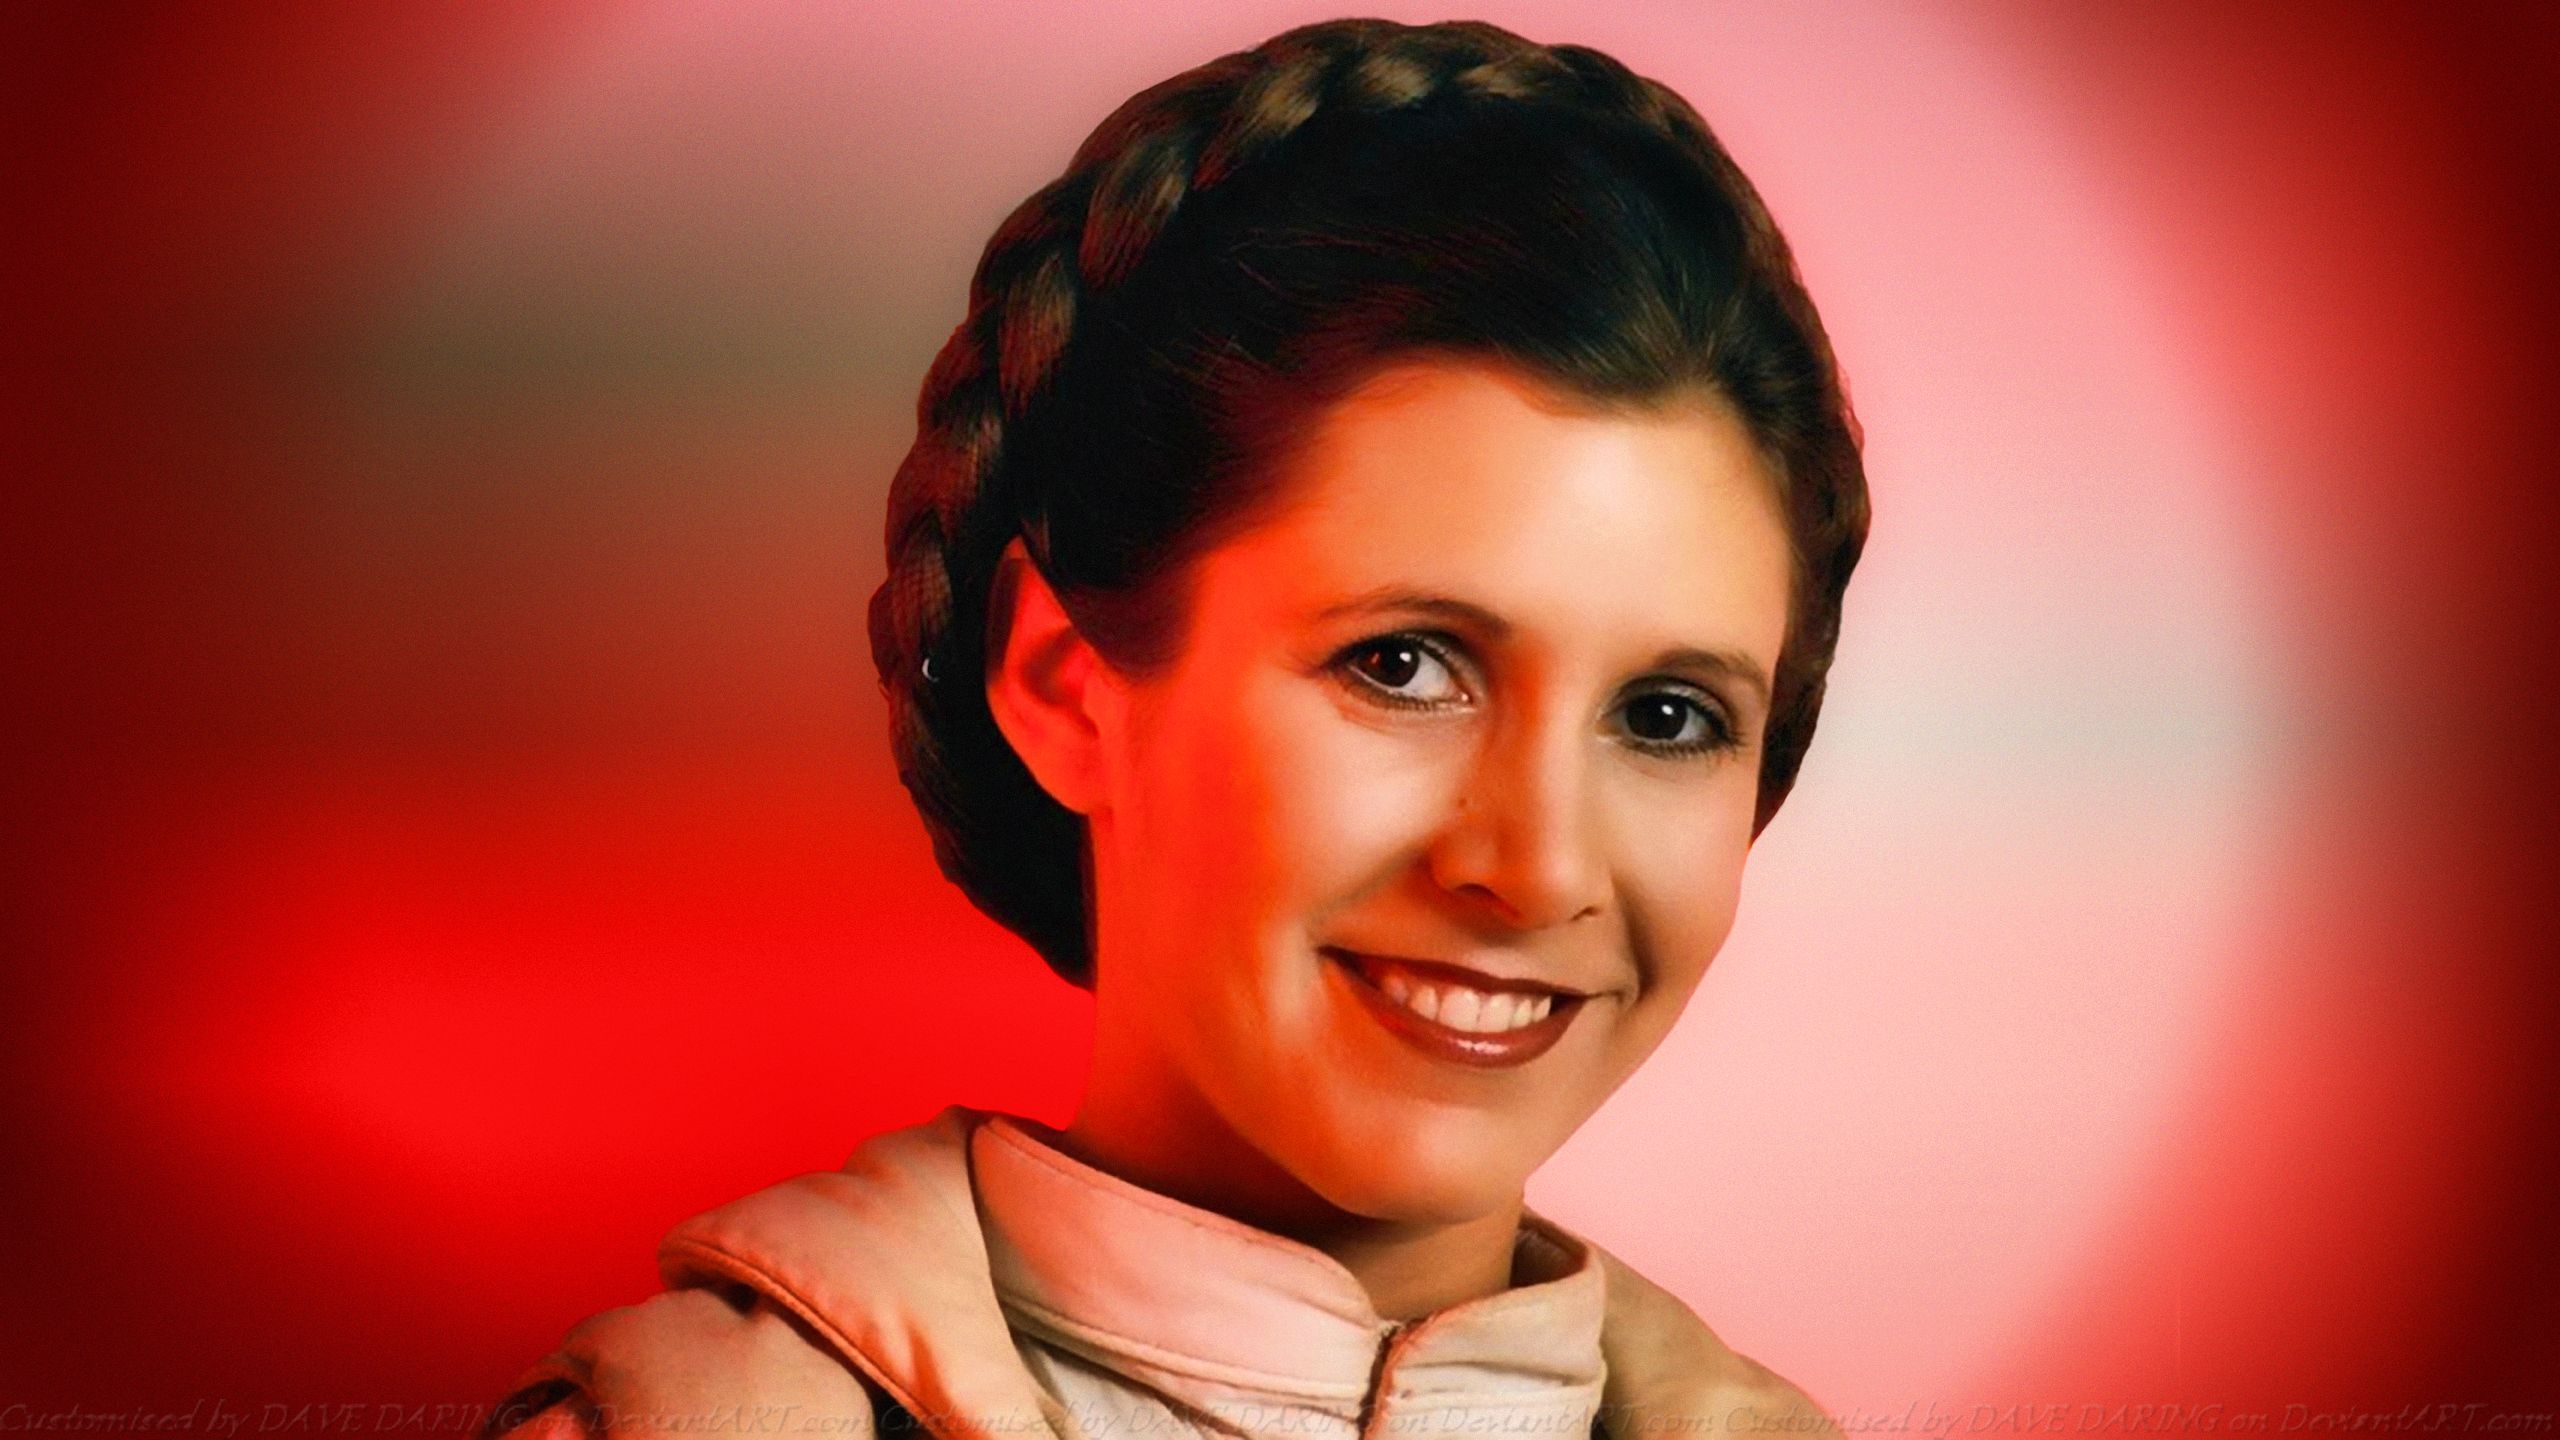 Carrie Fisher Princess Leia XXXII by Dave-Daring on DeviantArt